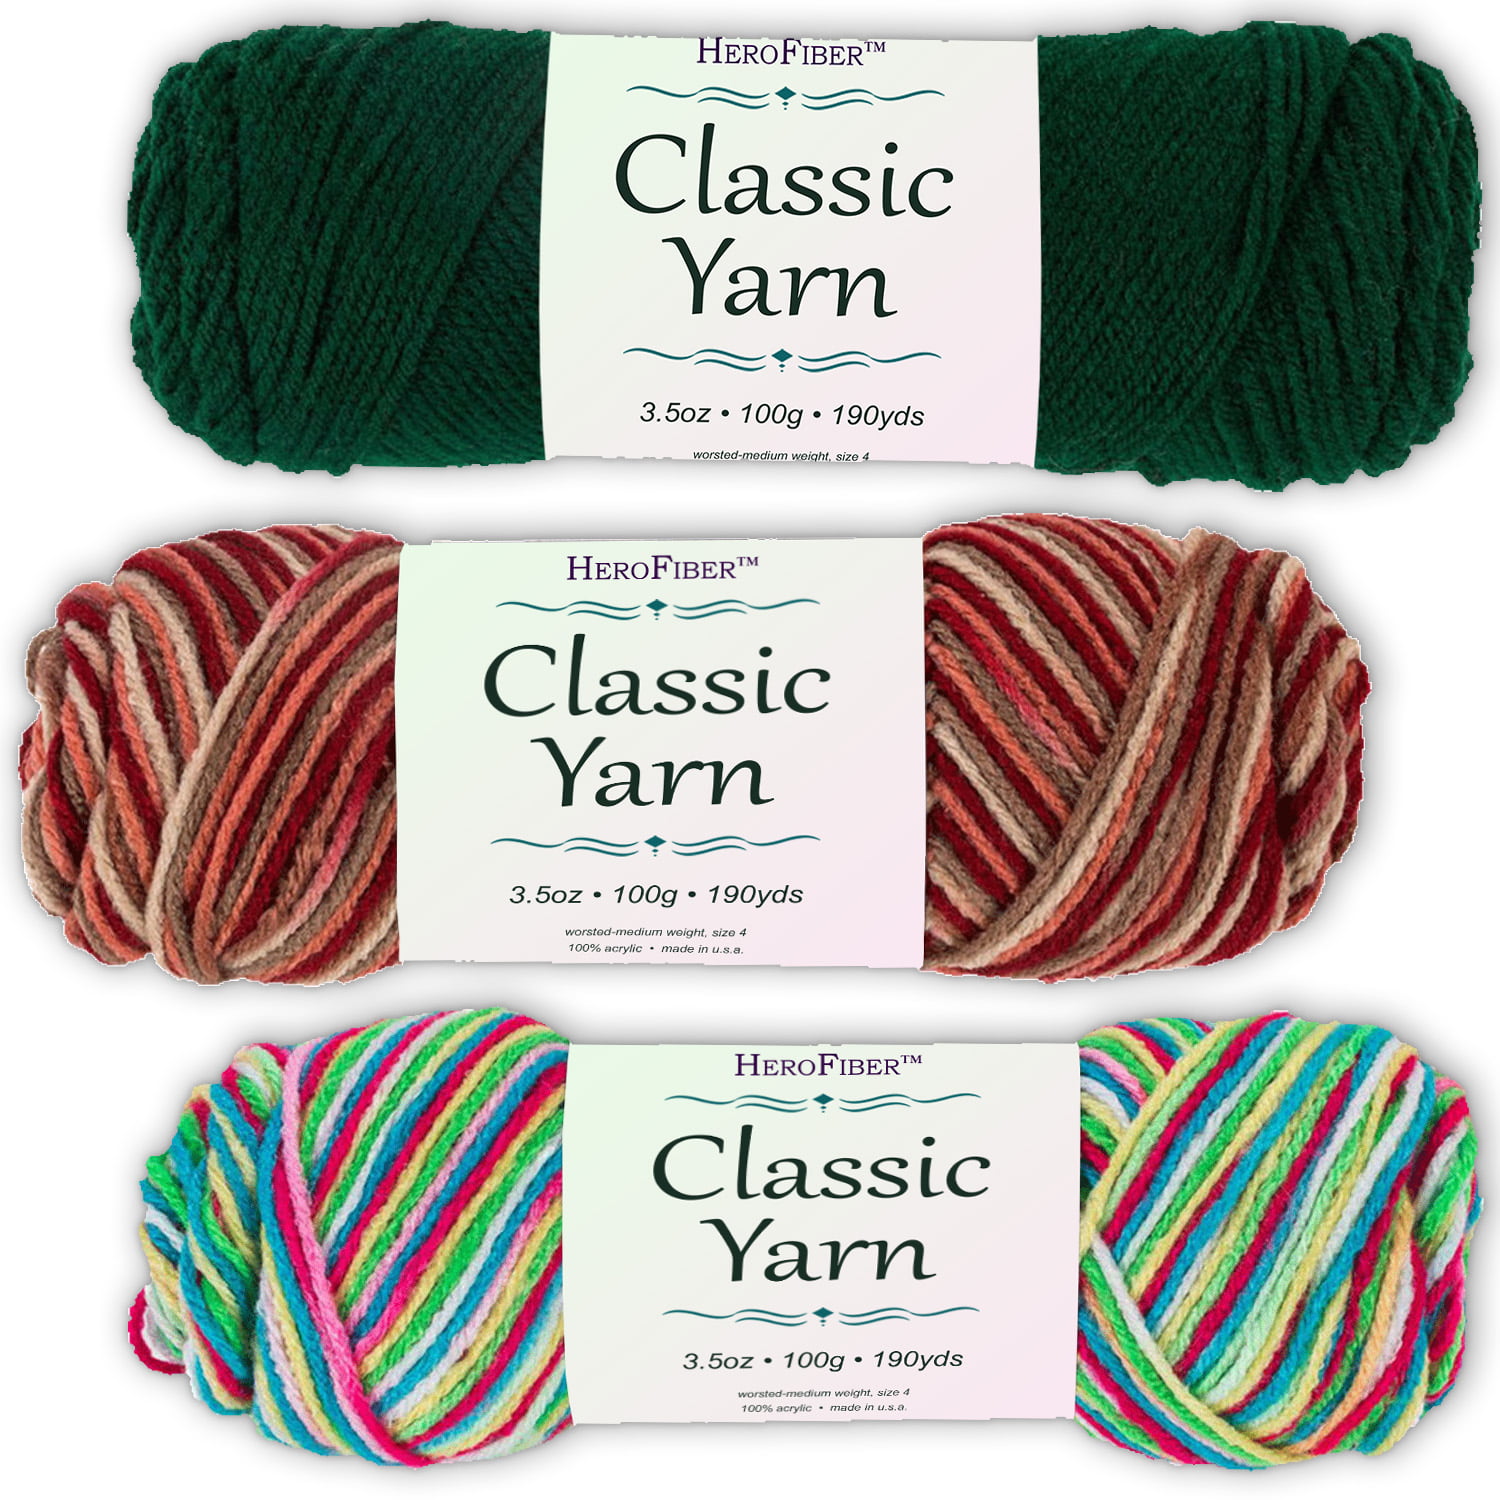 Soft Acrylic Yarn 3 Pack 3 5oz Ball Green Forest Blend Sedona Blend Rainbow Great Value For Knitting Crochet Needlework Arts Crafts Projects Gift Set For Beginners And Pros Alike